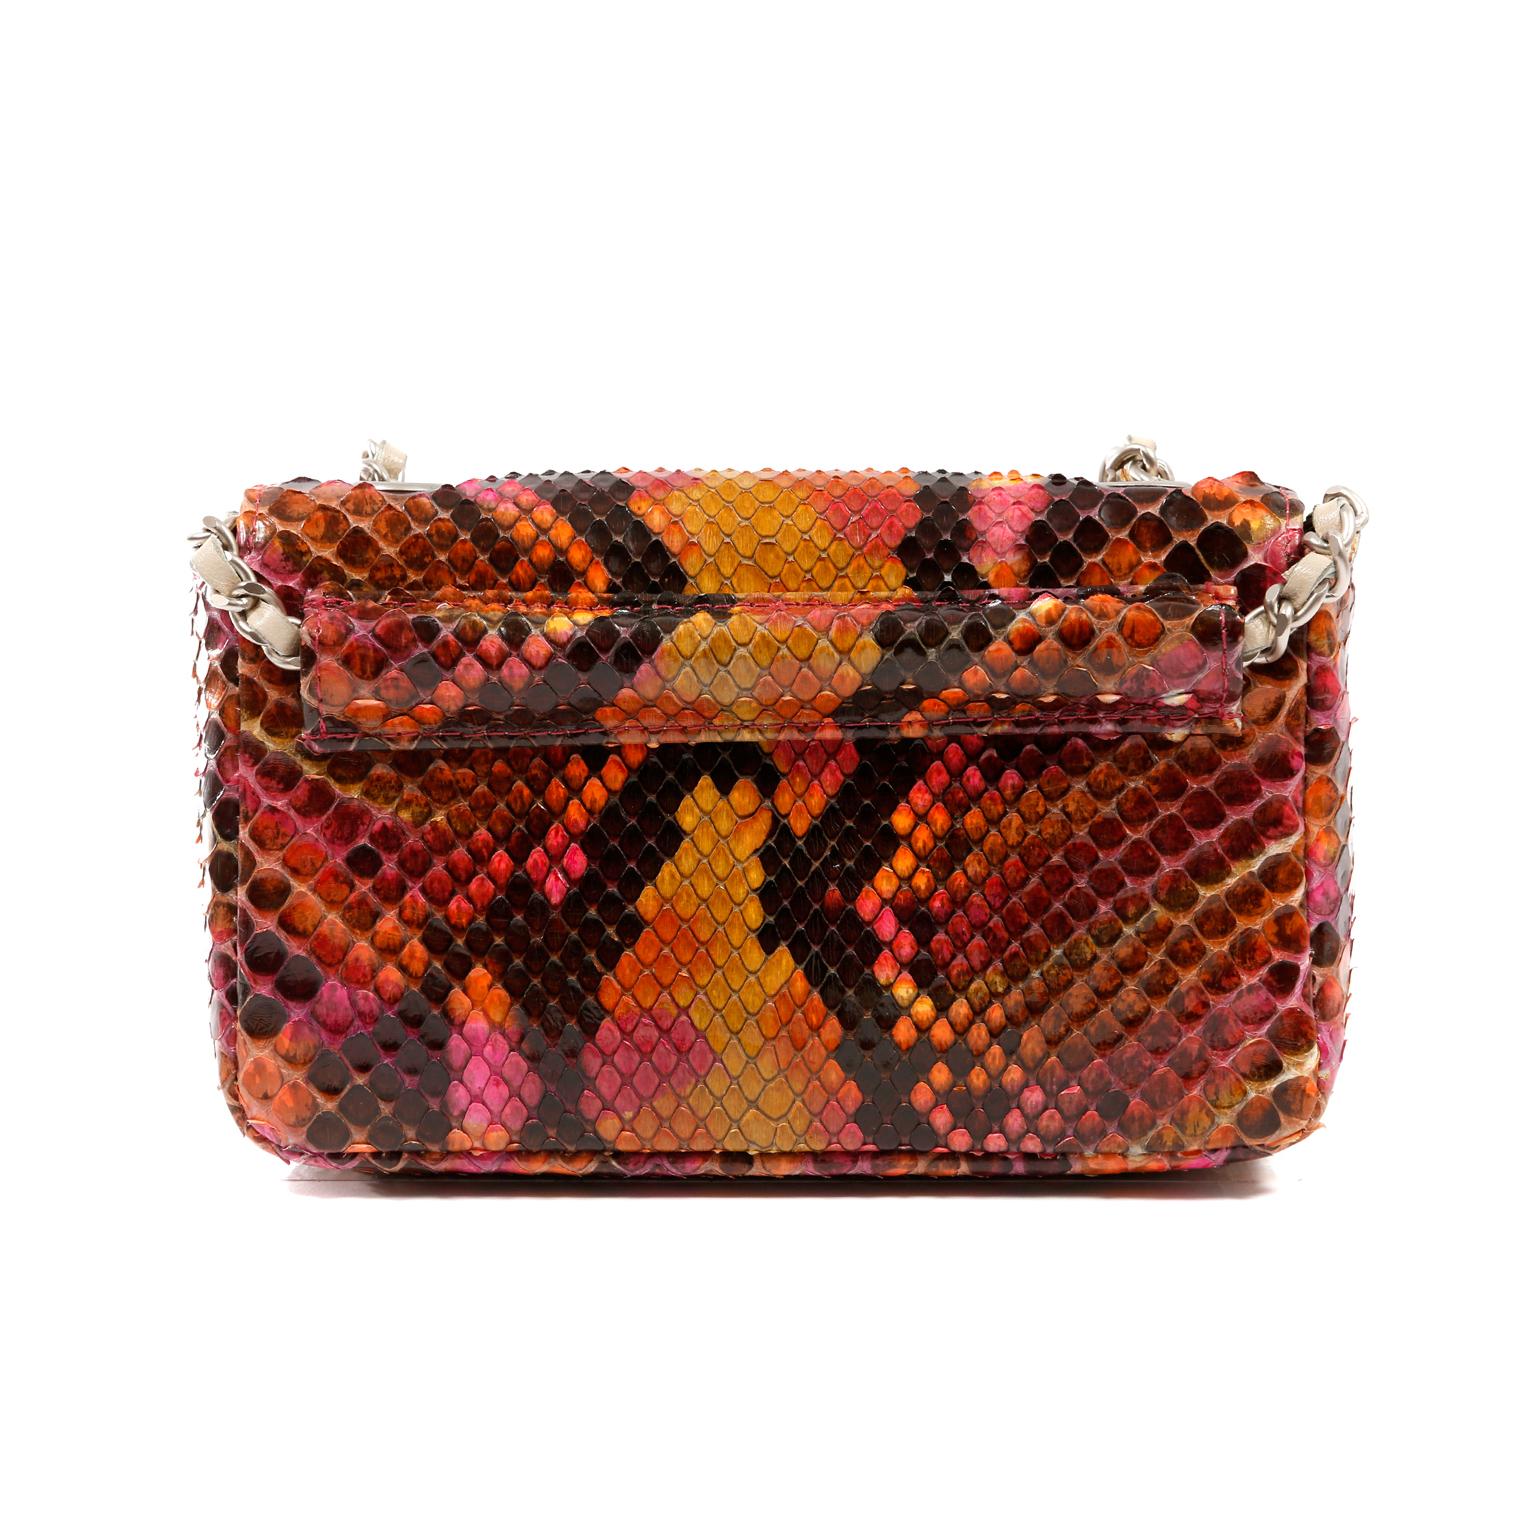 This authentic Chanel Multicolor Python Mini Flap Bag is in excellent condition.  A fabulous versatile piece, it can be carried as a shoulder bag or worn as a belt. 
Brightly hued python skin mini flap bag in shades of orange and fuchsia.  Snap